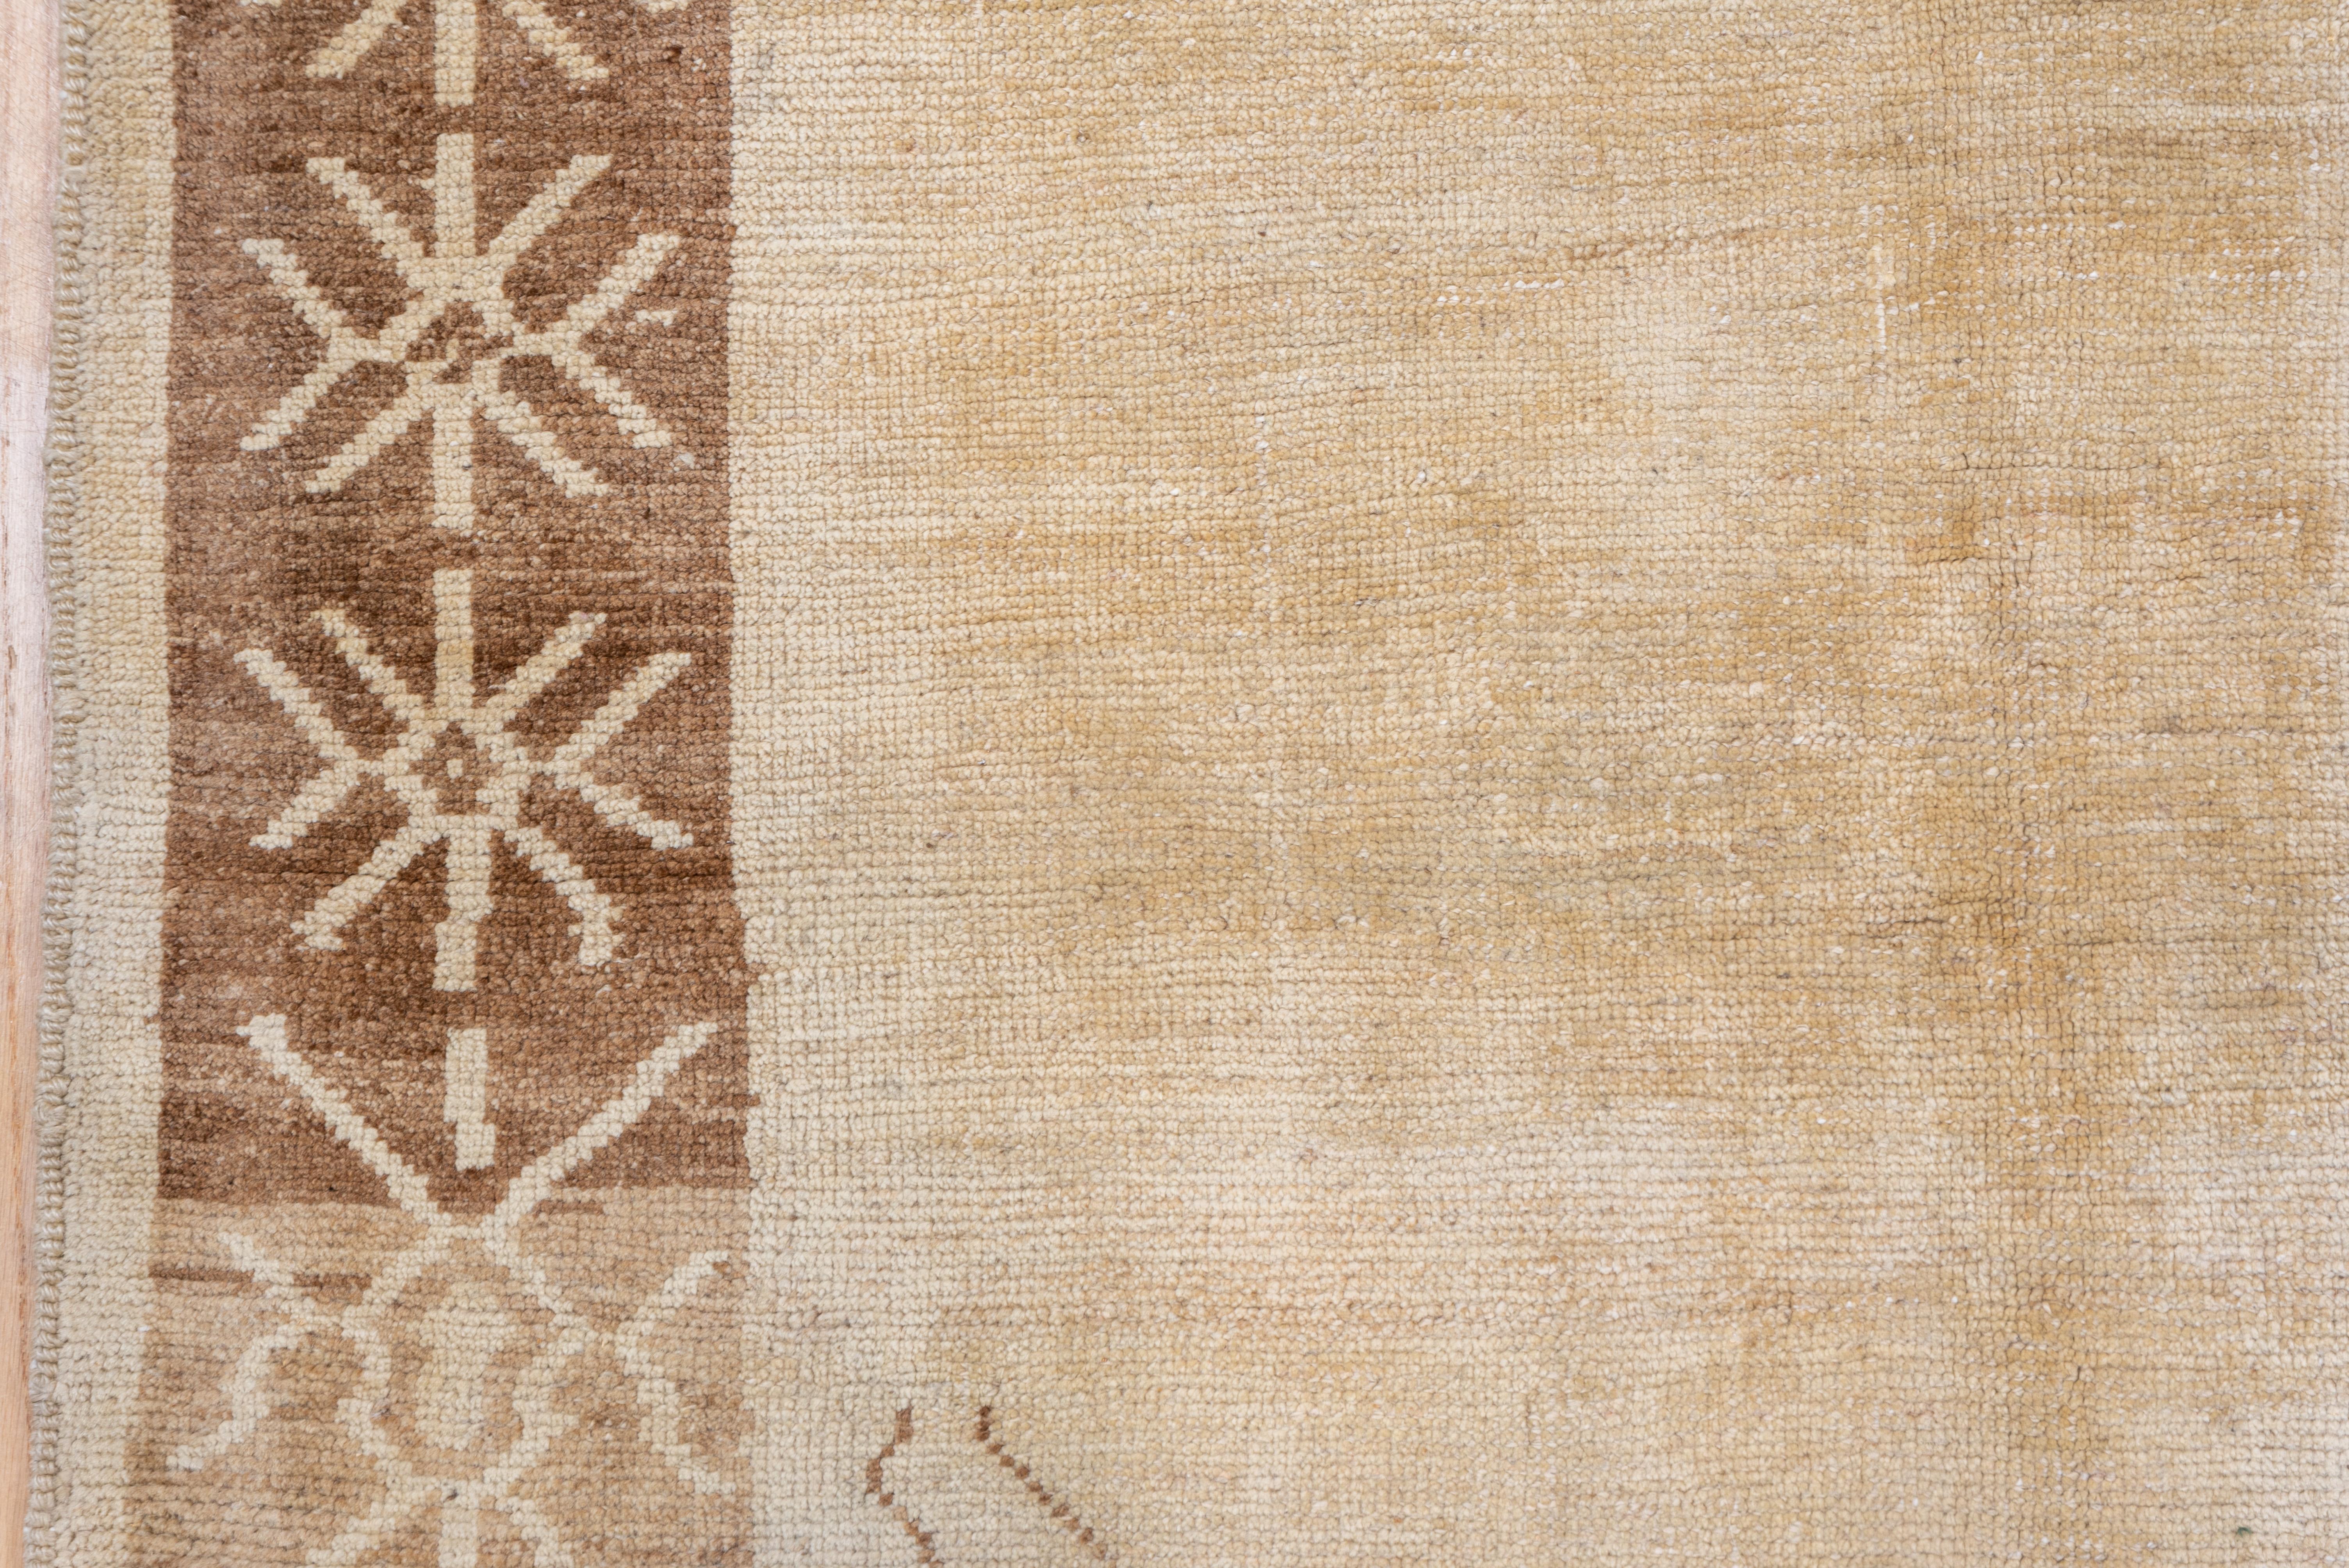 Mid-20th Century Rustic Turkish Oushak Rug, Open Field, Neutral Palette For Sale 2